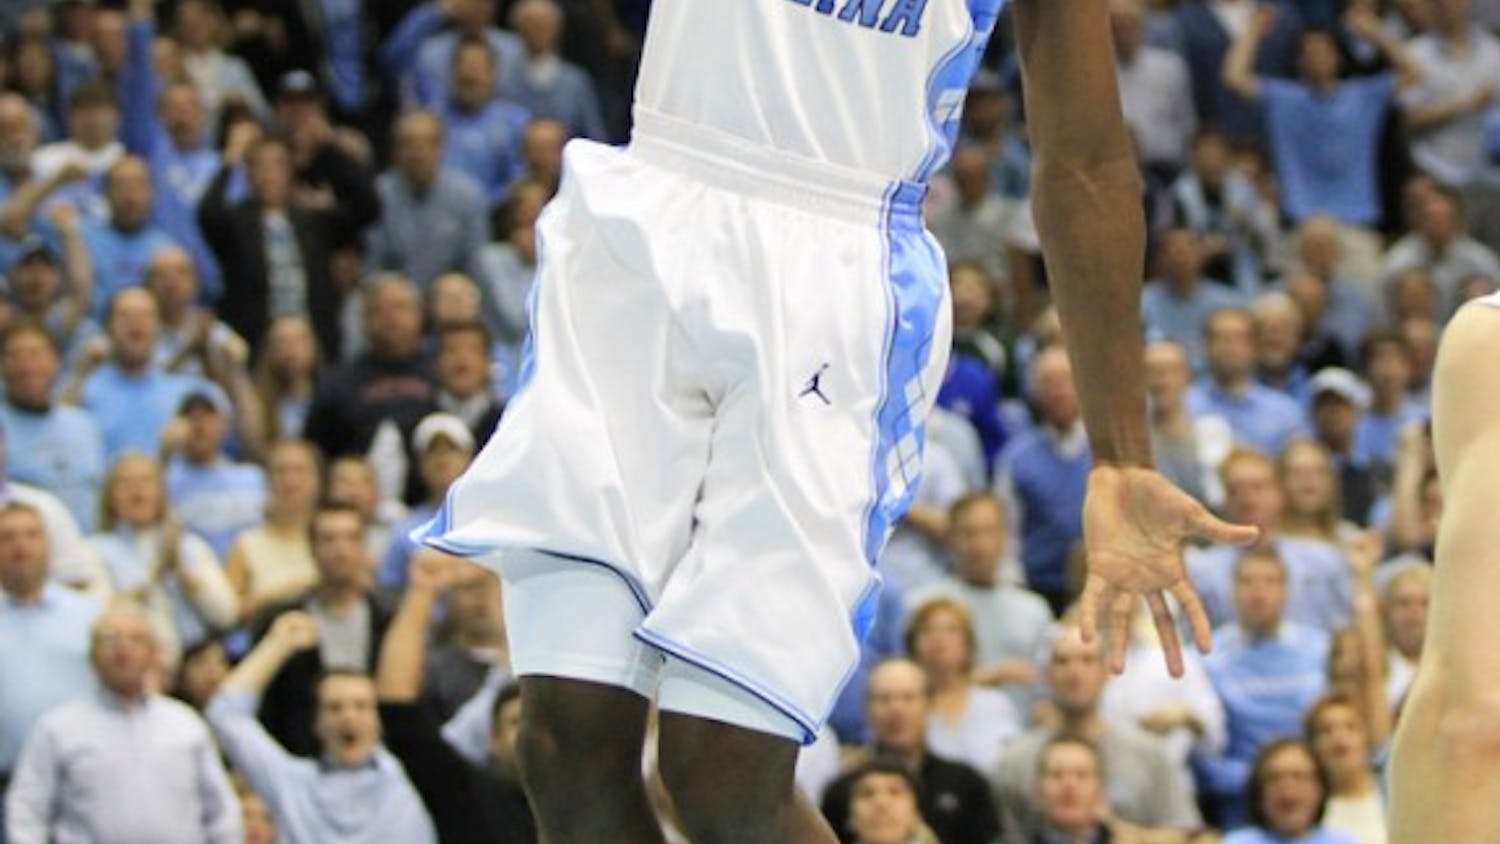 UNC’s Harrison Barnes goes up for a dunk in UNC’s 75-73 win against Kentucky. The preseason All-American finished the game with 12 points.